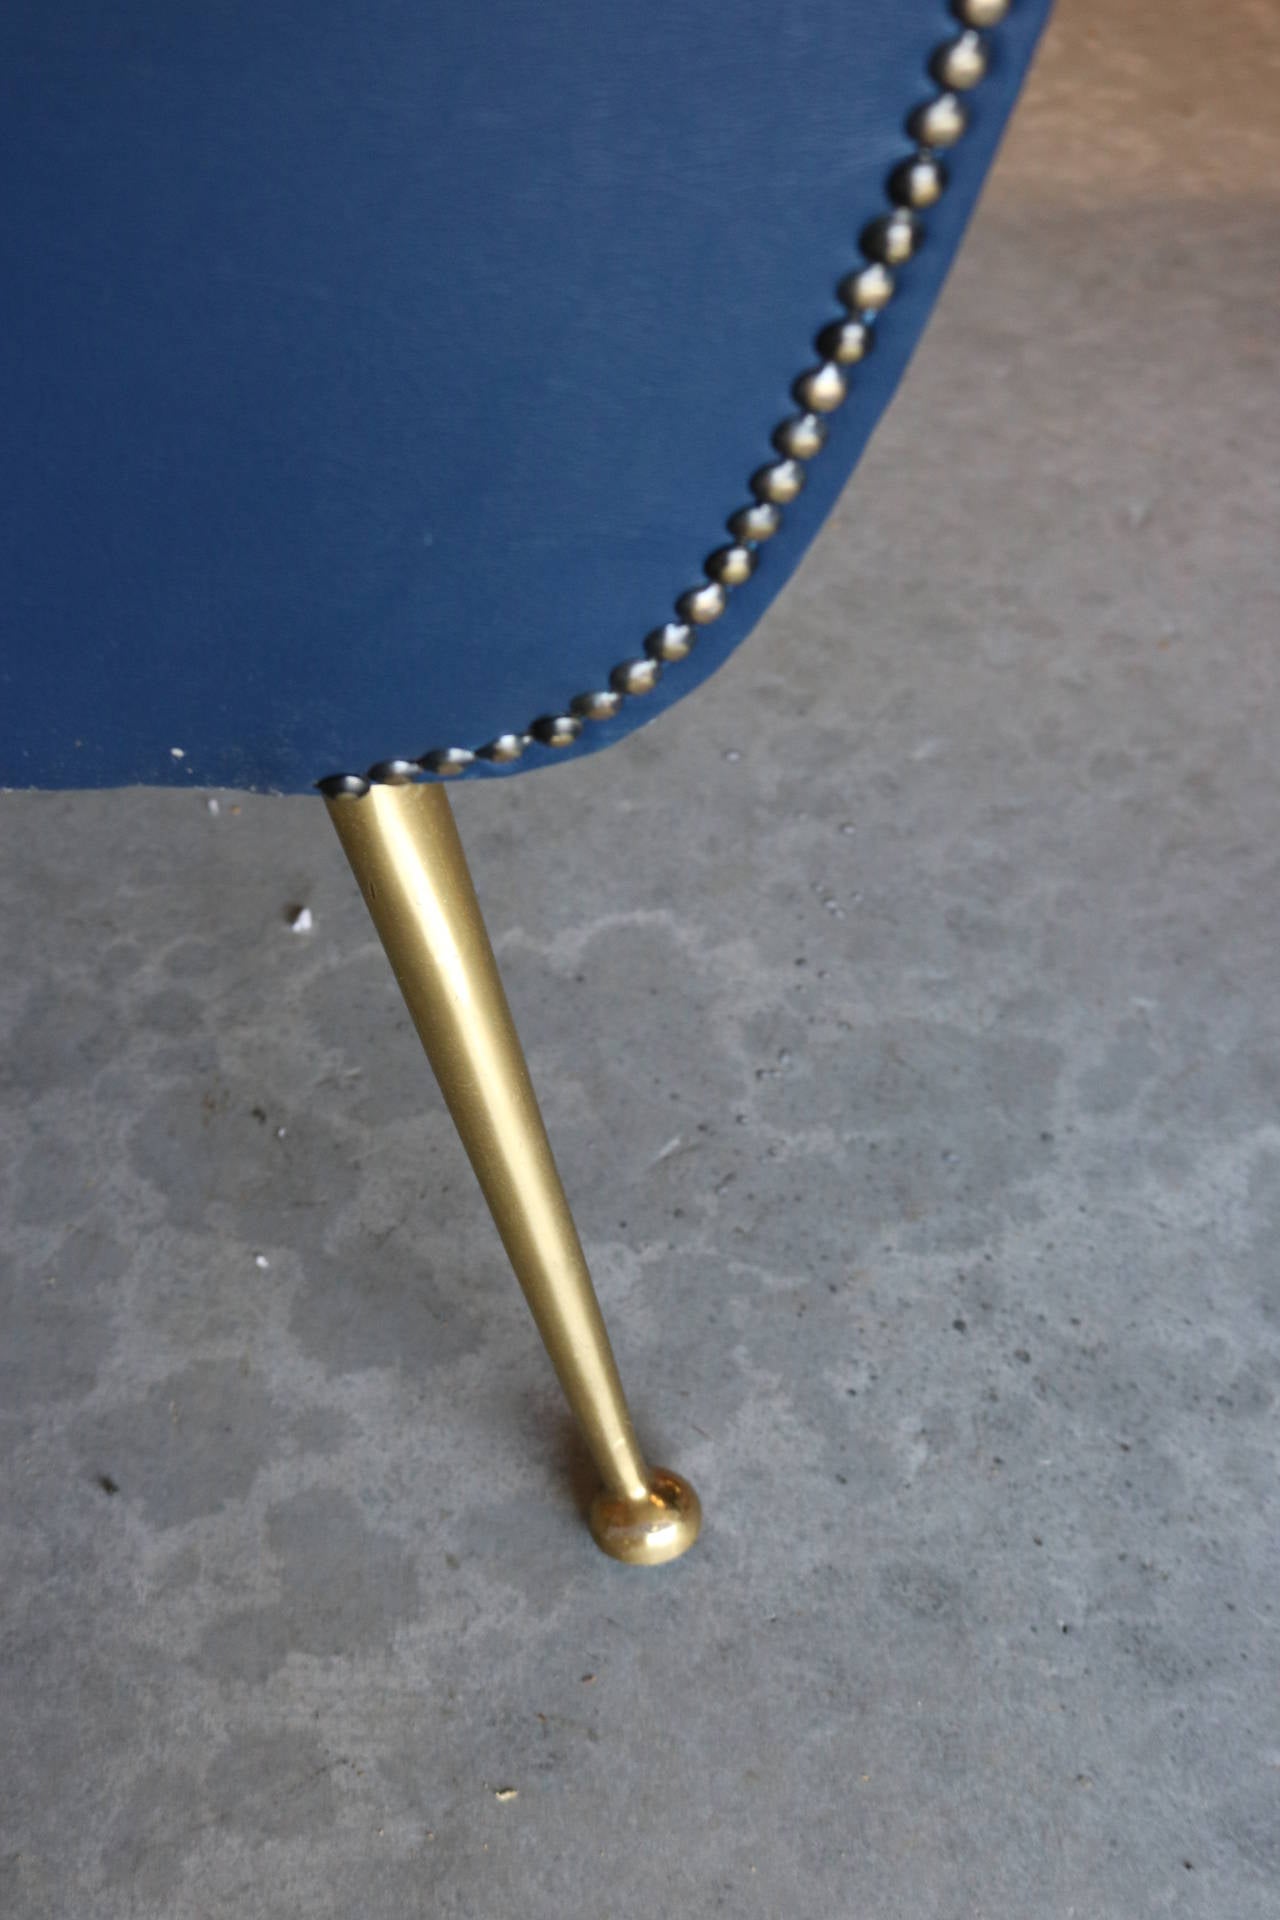 This is an exquisite pair of Mid-Century Modern armchairs made in Italy and designed by Gigi Radice. Each has been lovingly upholstered in blue Naugahyde with brass nails. Original sculptural brass legs are in excellent condition.